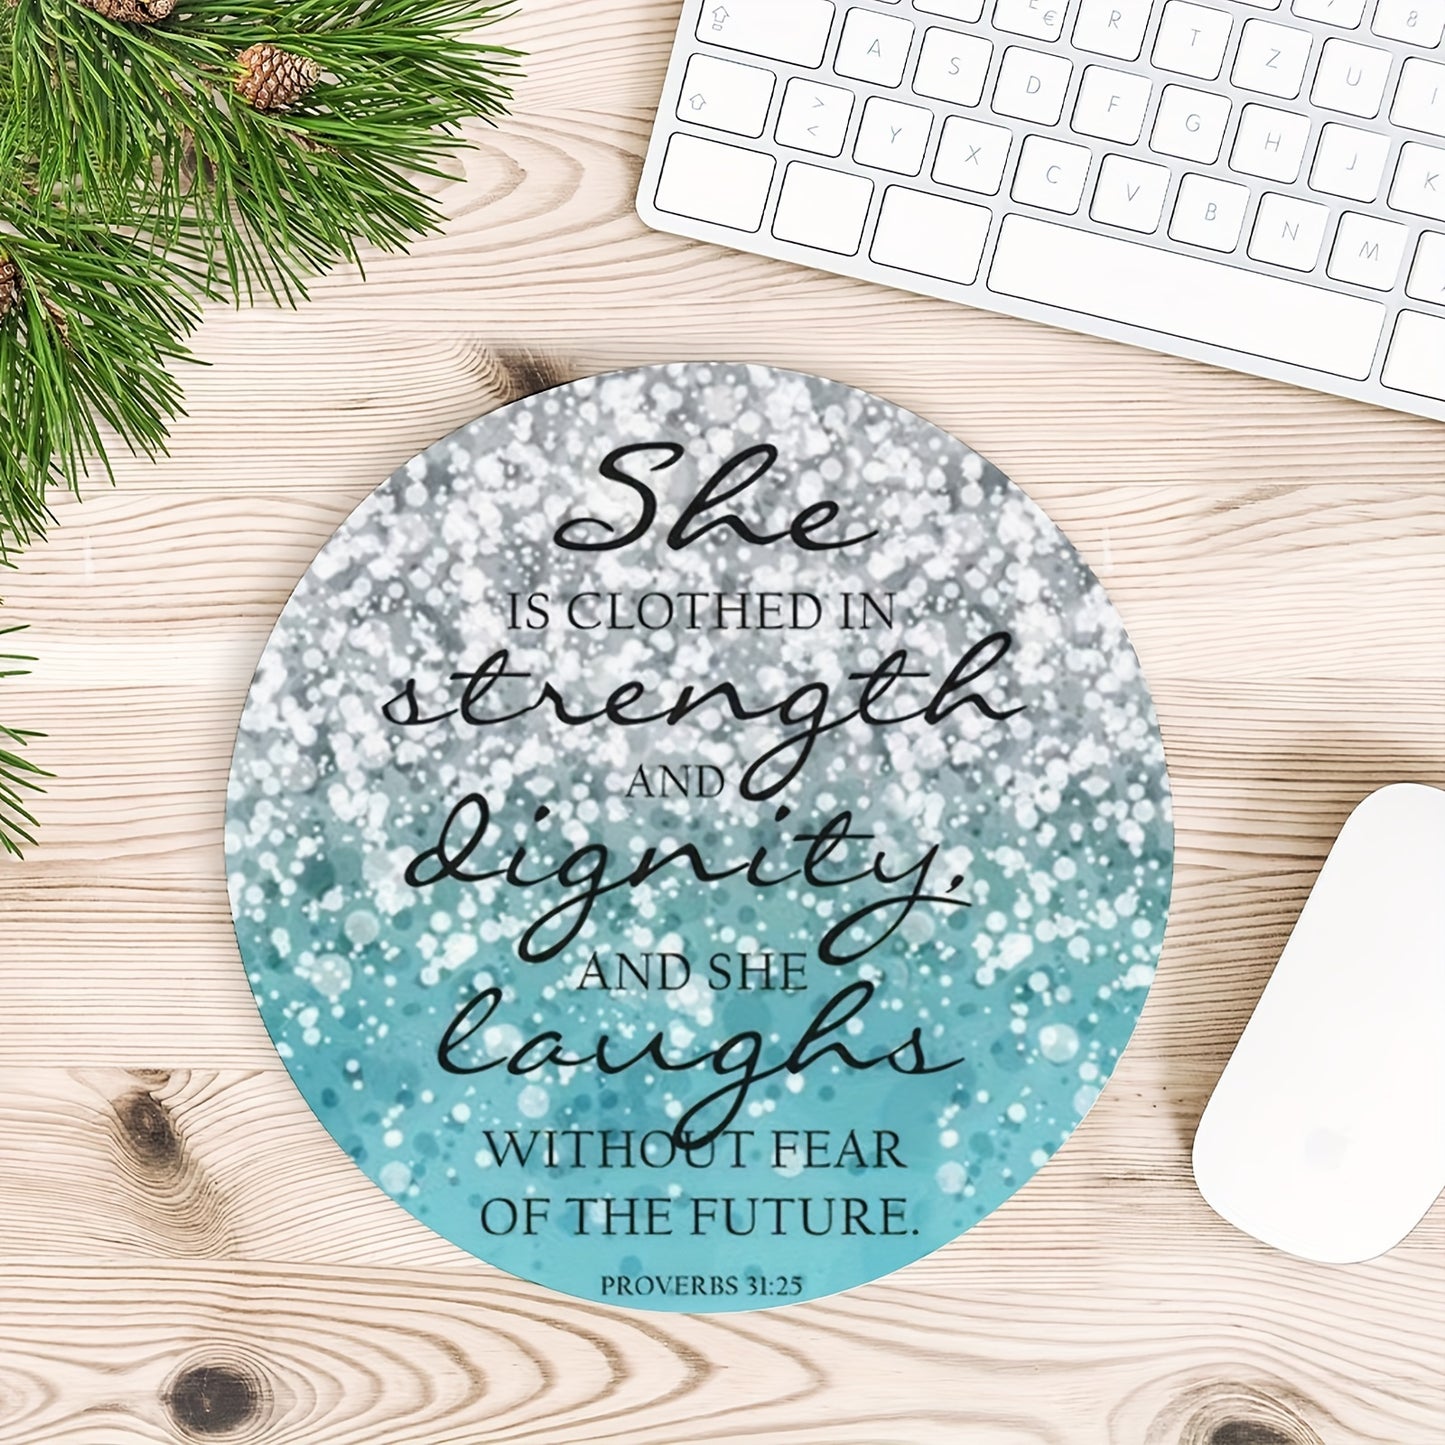 Proverbs 31:25 She Is Clothed In Strength Christian Computer Mouse Pad 7.87 X 7.87 X 0.1 Inch (20cm X 20cm X 0.2cm) claimedbygoddesigns